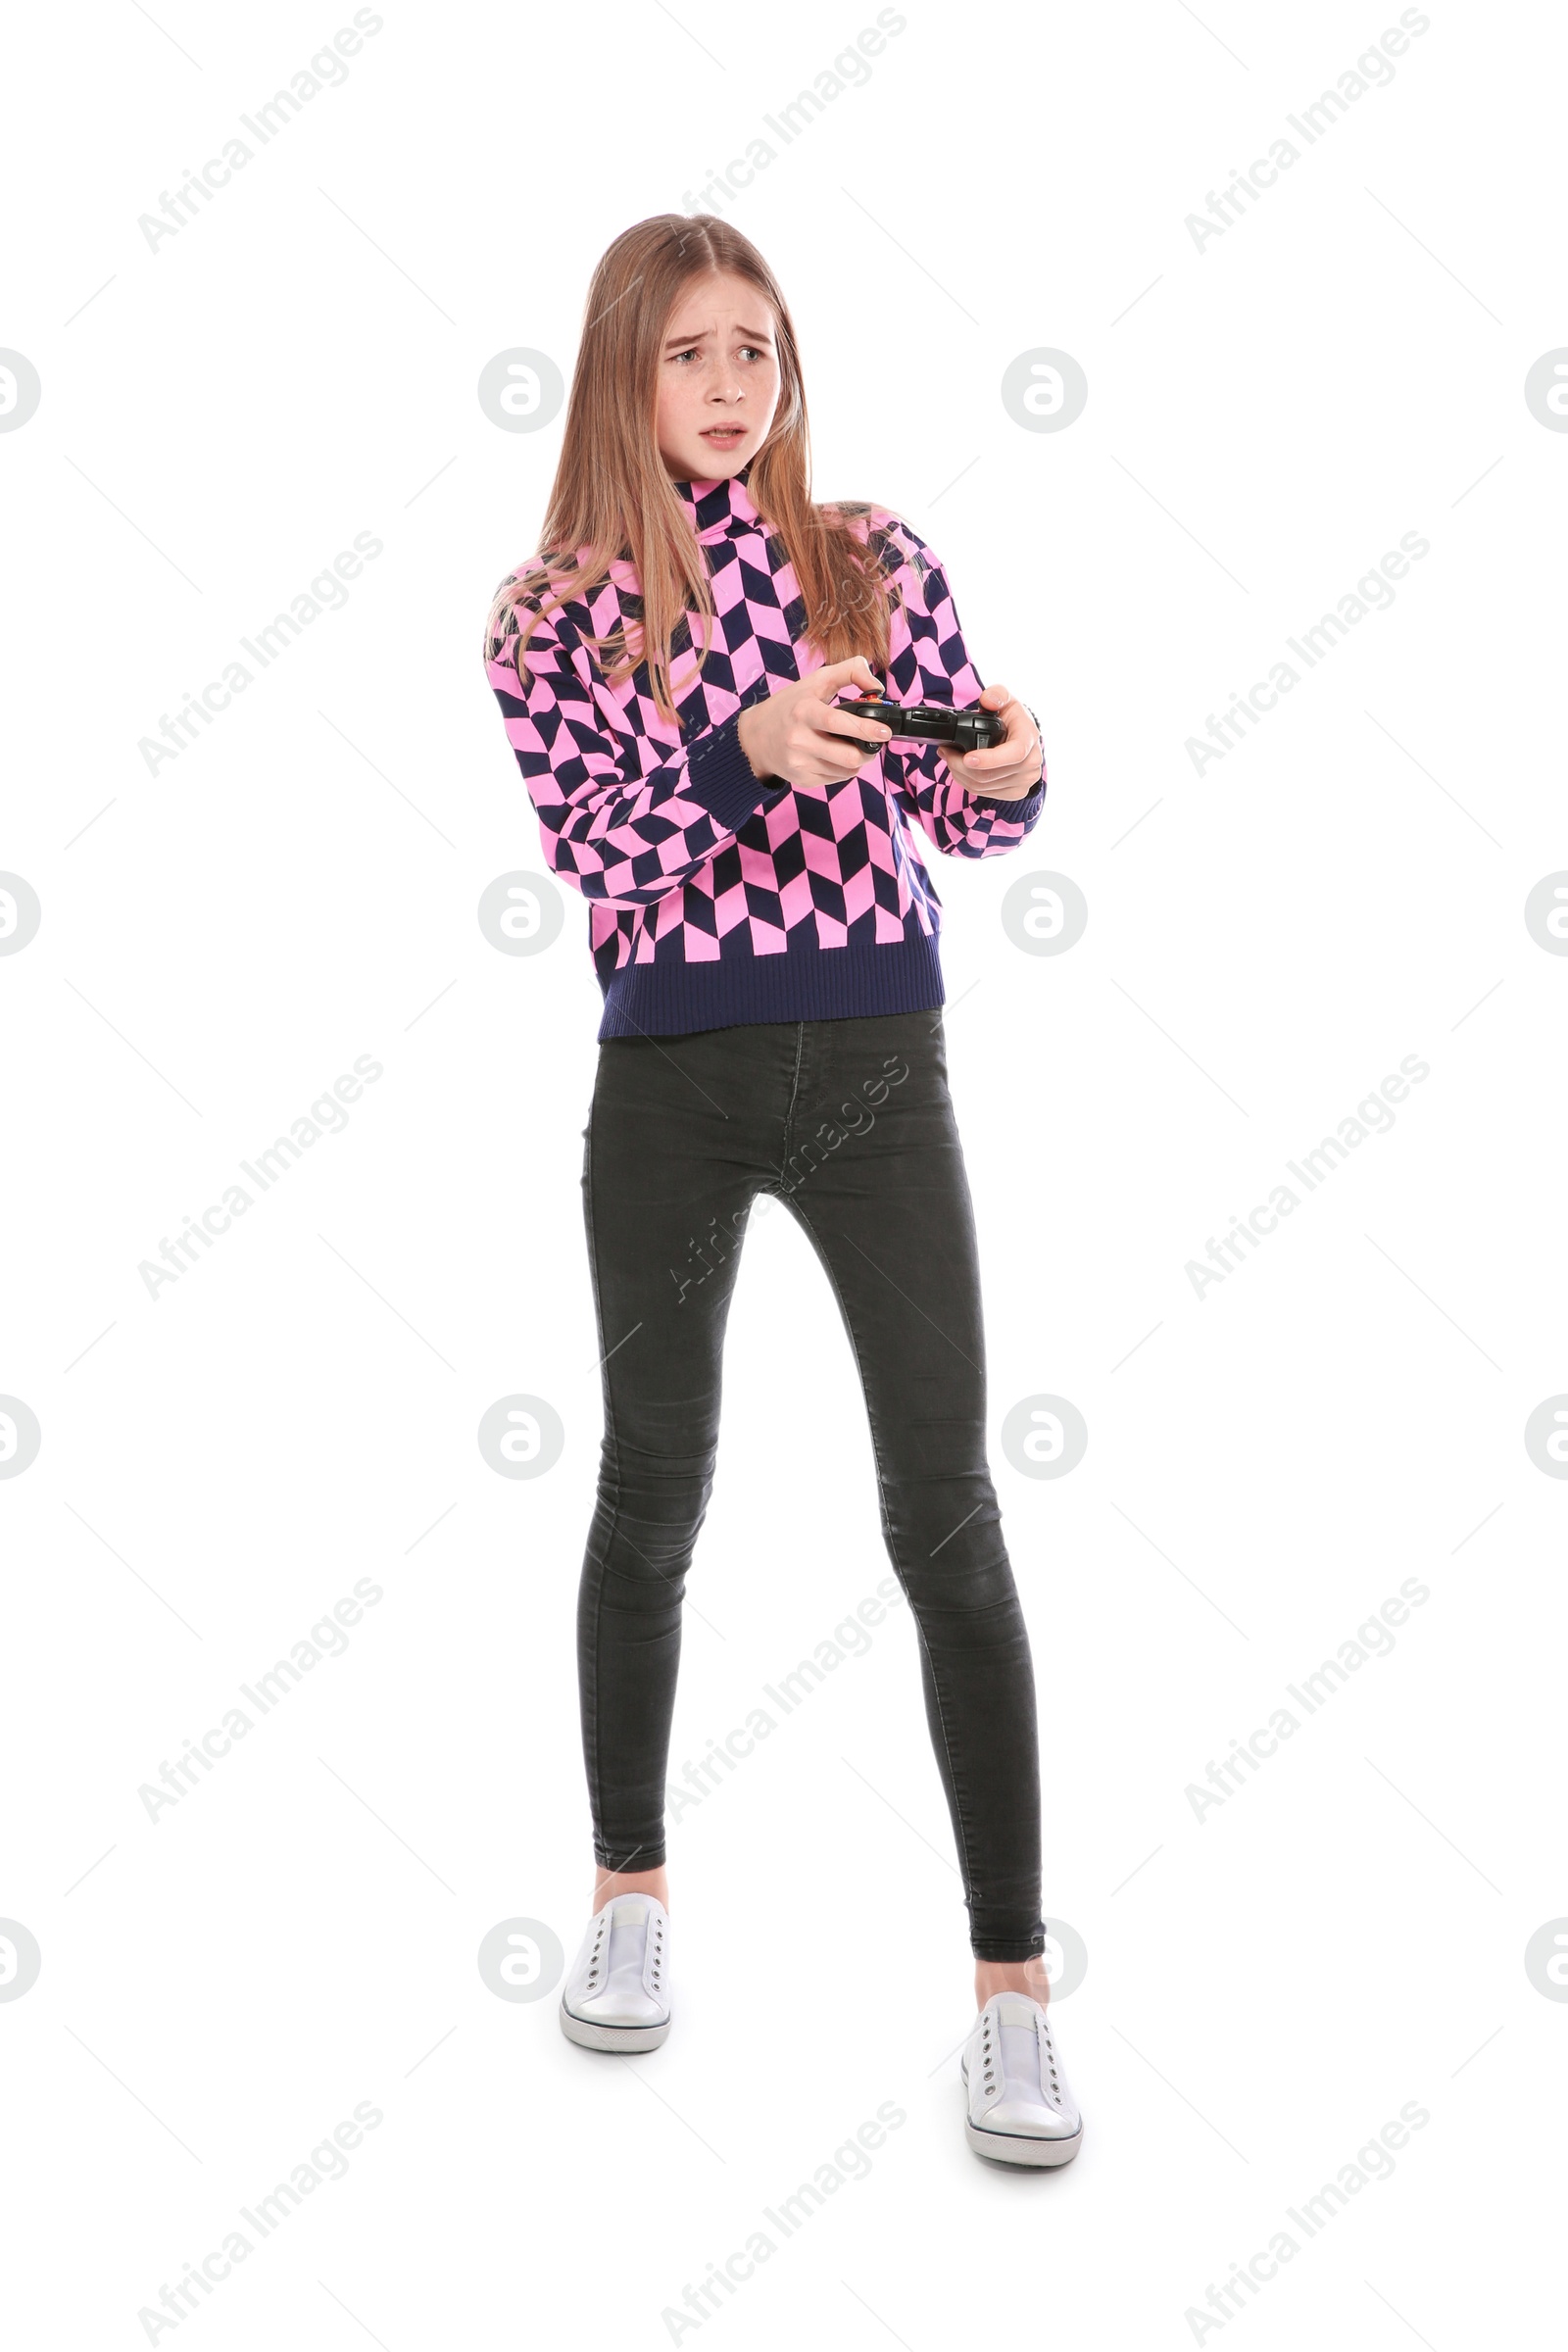 Photo of Teenage girl playing video games with controller isolated on white